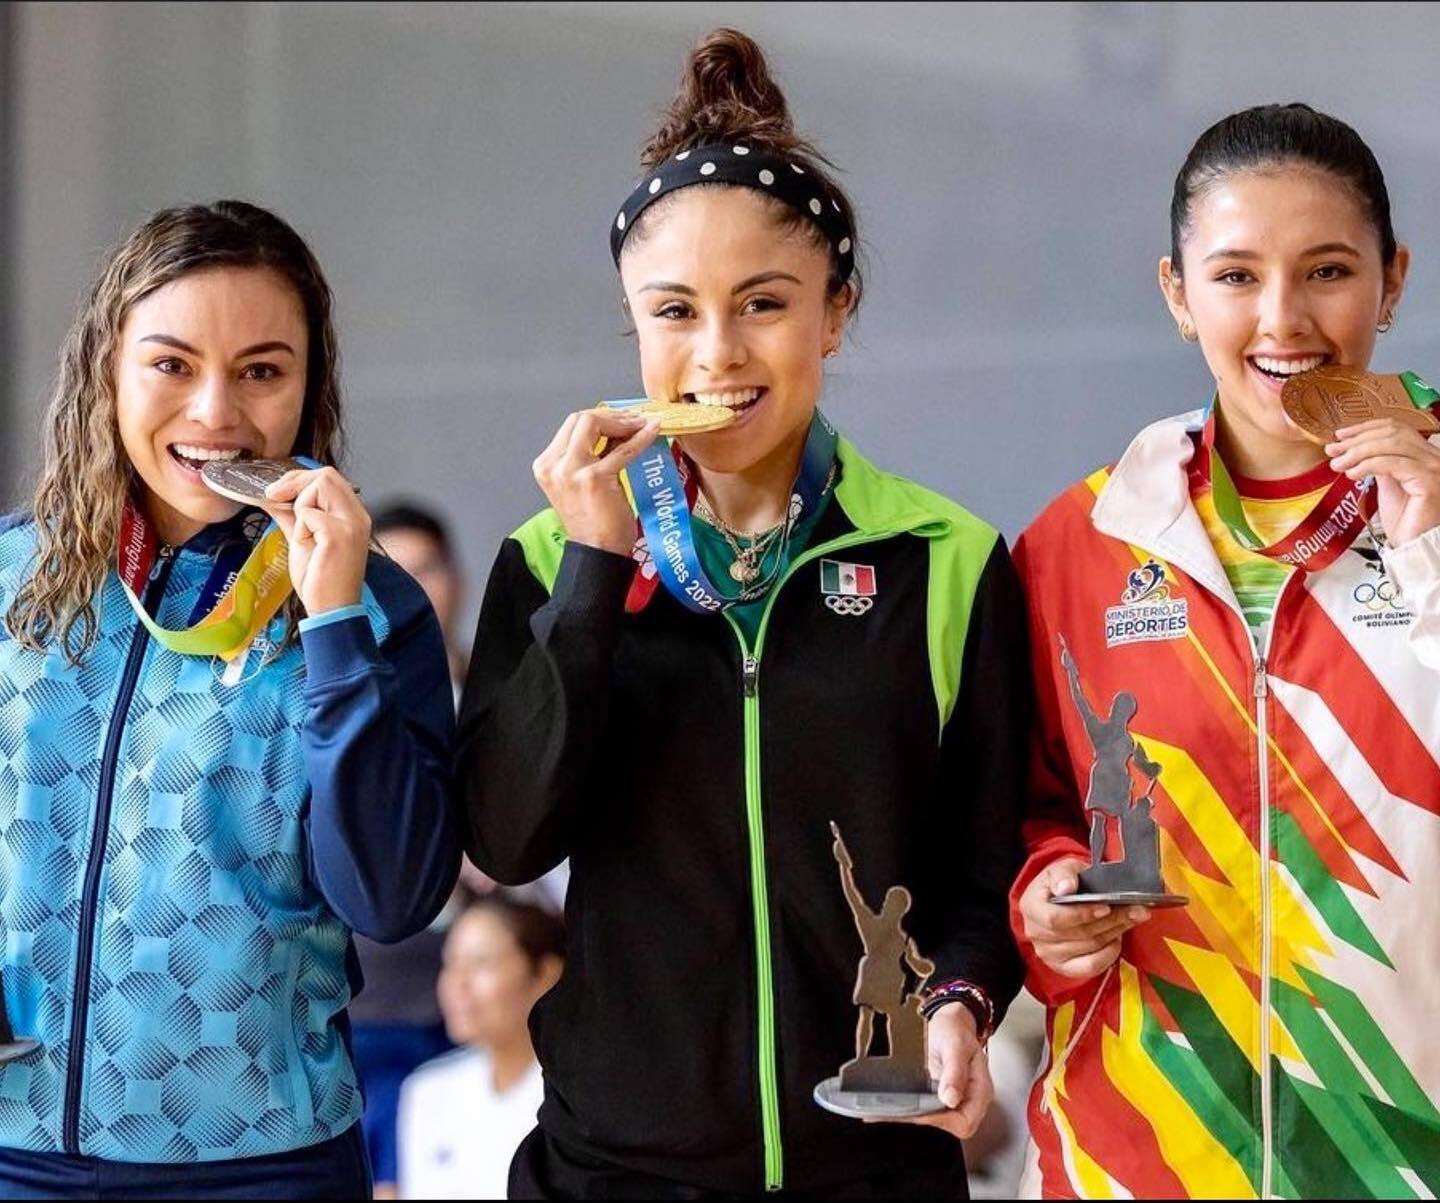 Gaby Martinez, Paola Longoria, and Angelica Barrios at the 2022 World Games.